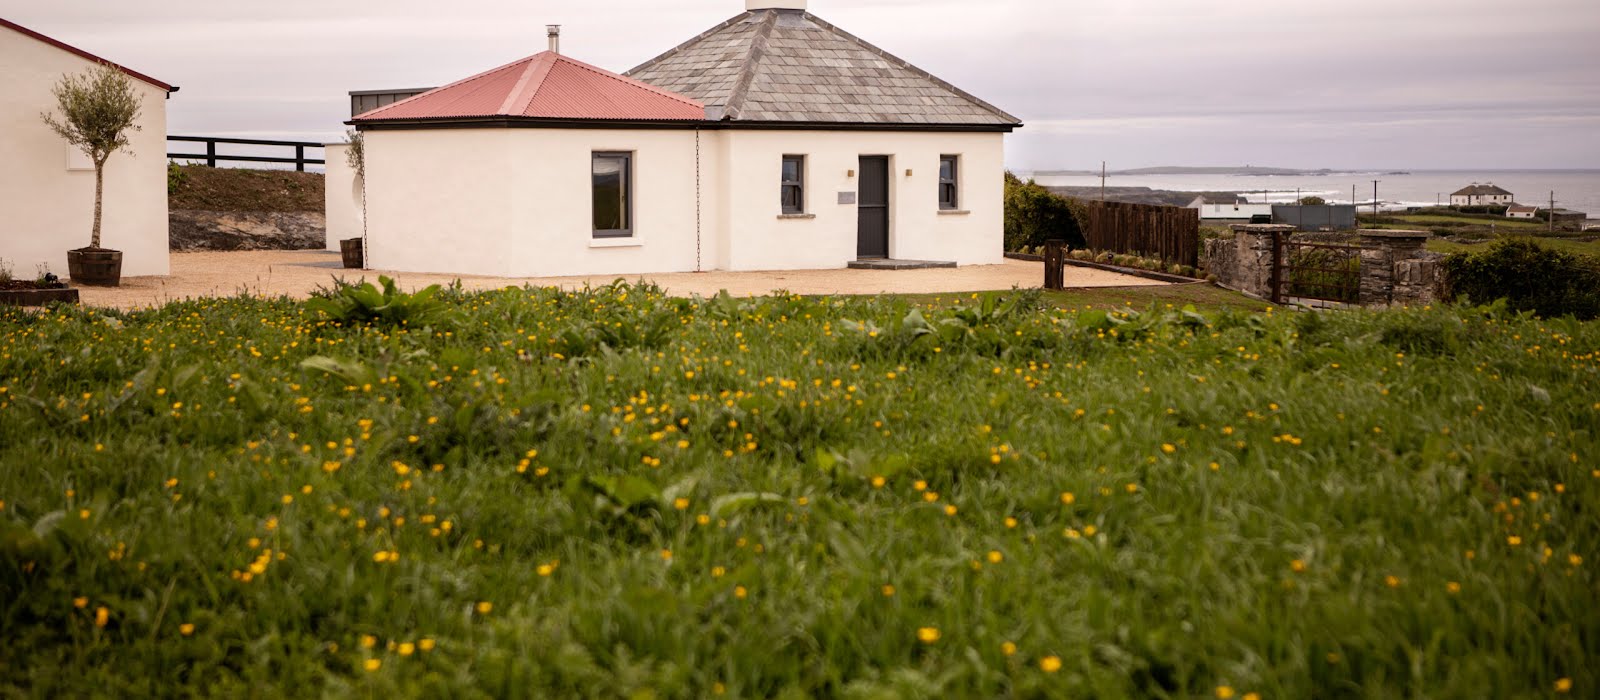 Irish farm stays: this Co Clare gate lodge marries rustic charm with modern luxuries